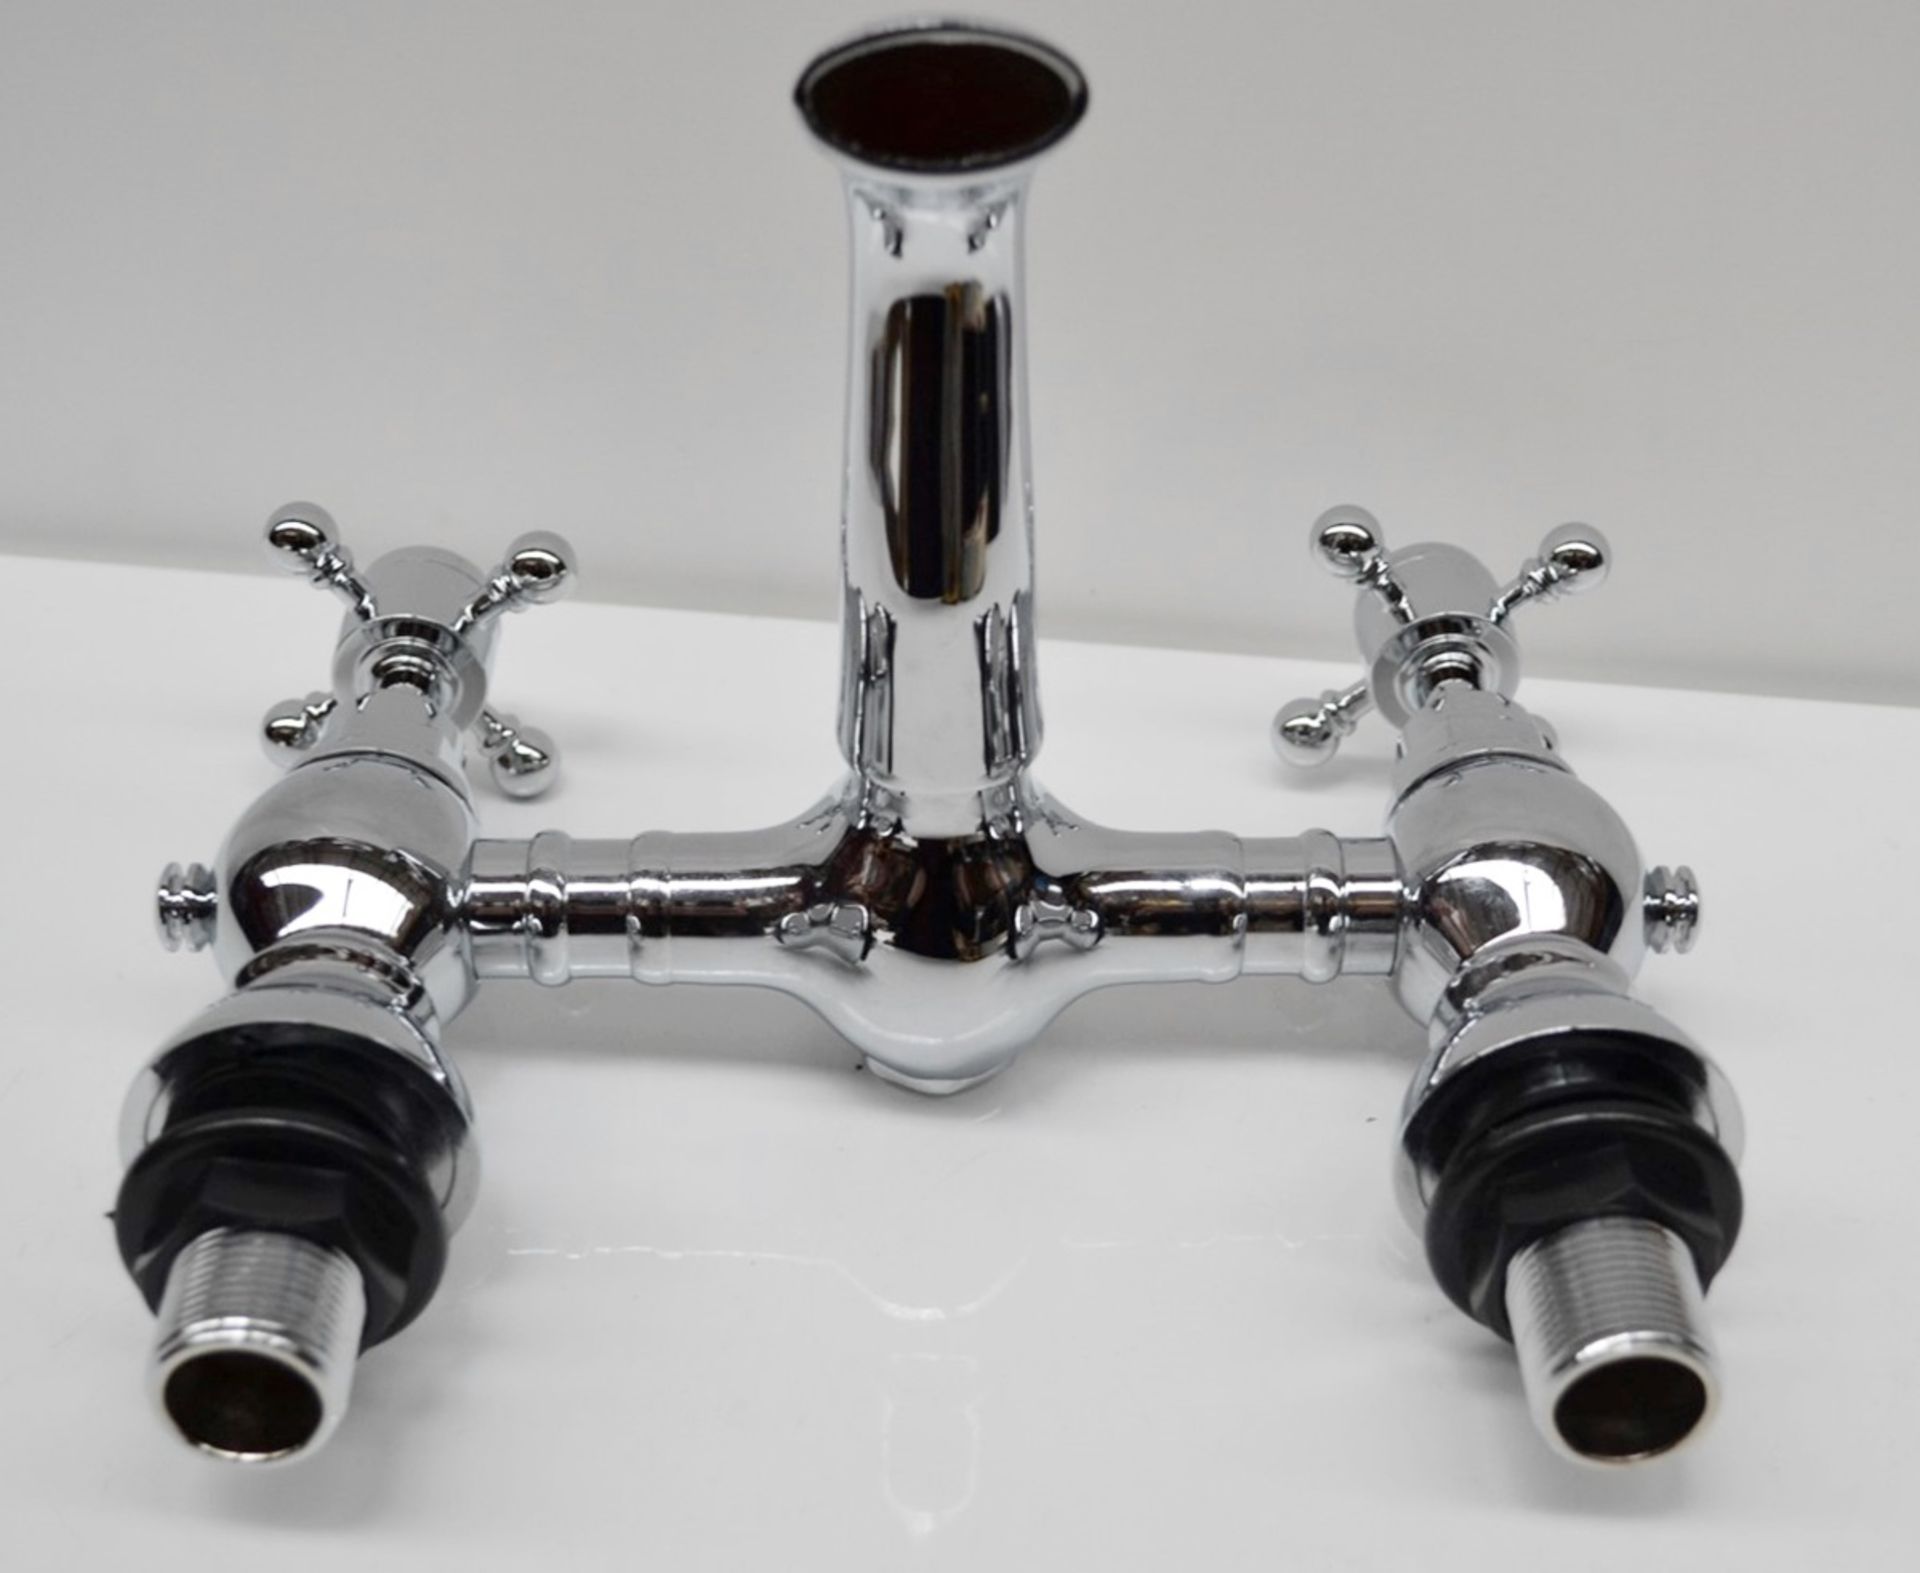 1 x CONISTON Edwardian-style Bath Mixer Tap - Ref: MBI010 - CL190 - Unused Boxed Stock - Location: - Image 6 of 8